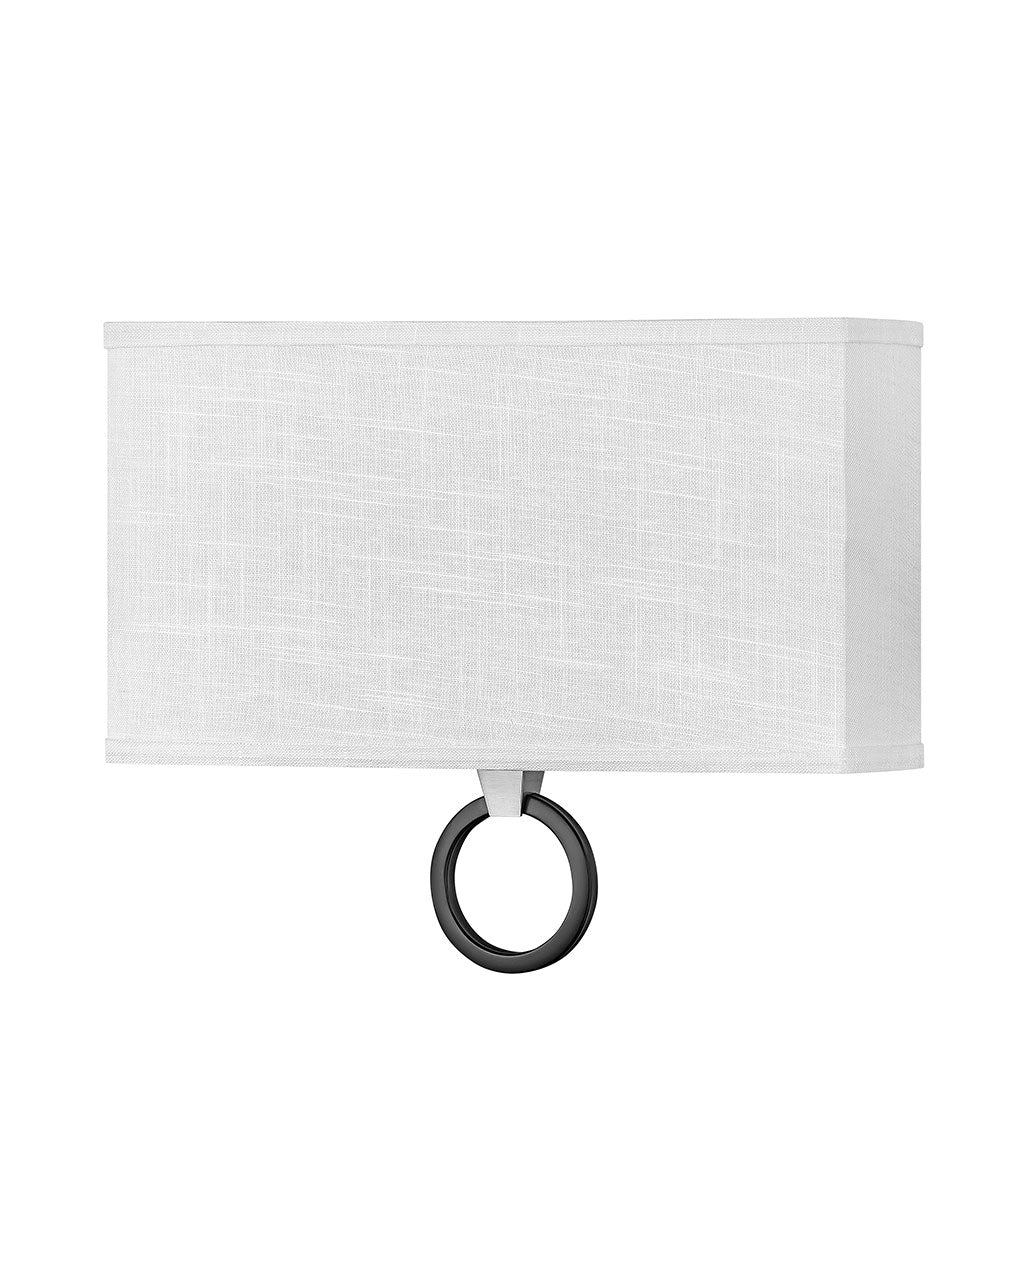 Hinkley - 41204BN - LED Wall Sconce - Link Off White - Brushed Nickel